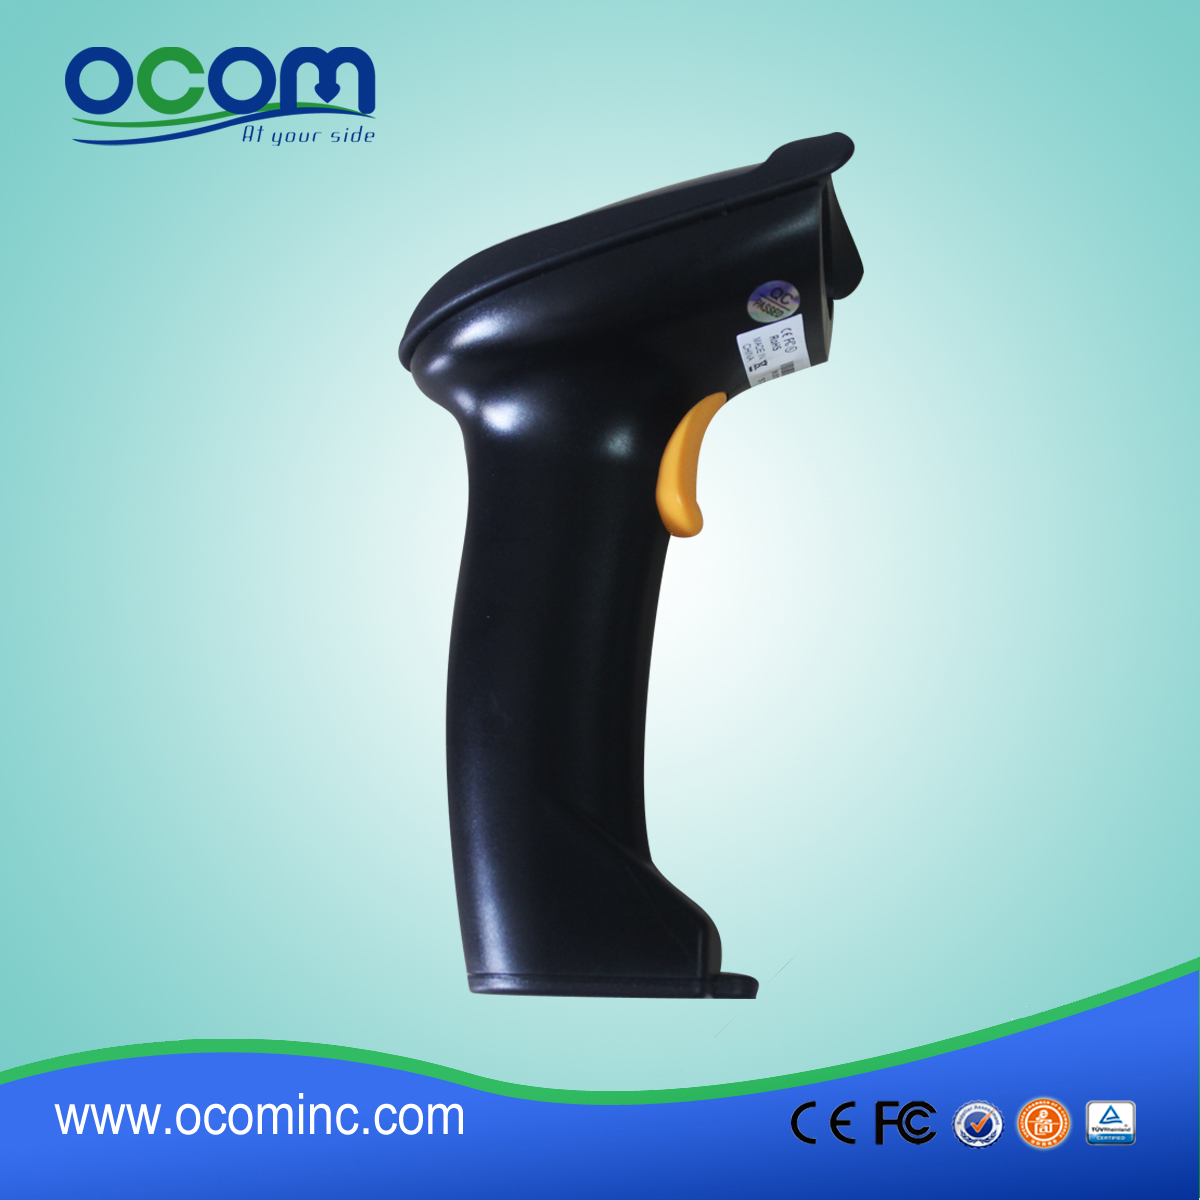 Android Bluetooth Barcode Scanner OCB-W700-B